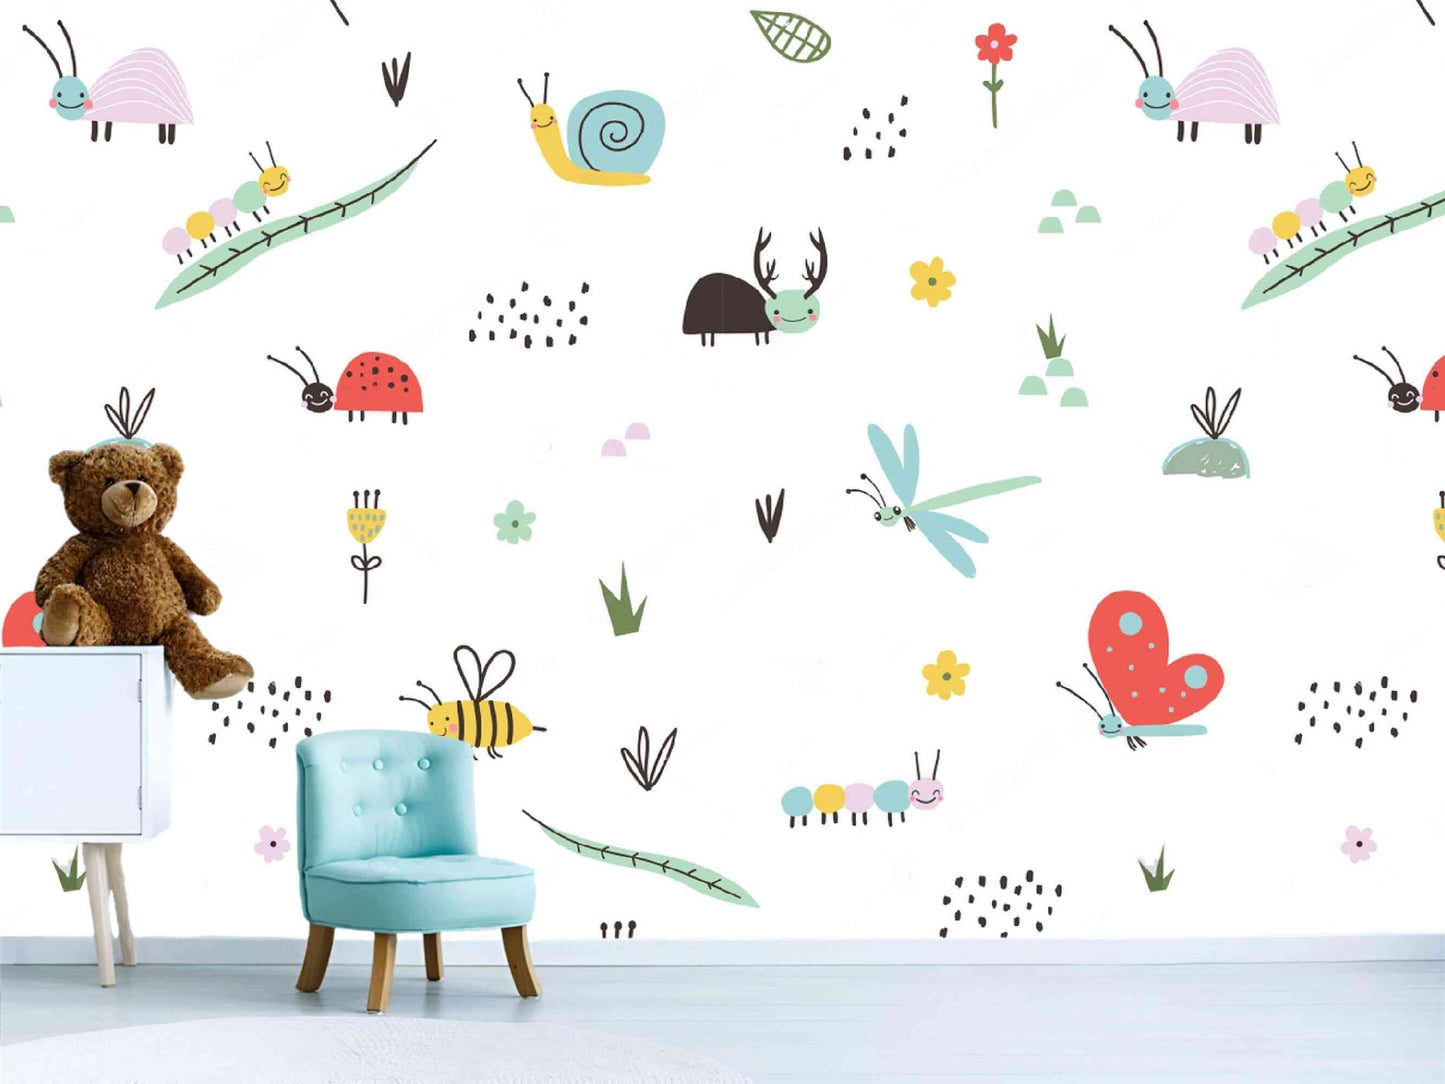 Adorable insect-themed wallpaper - cute and colorful patterns.